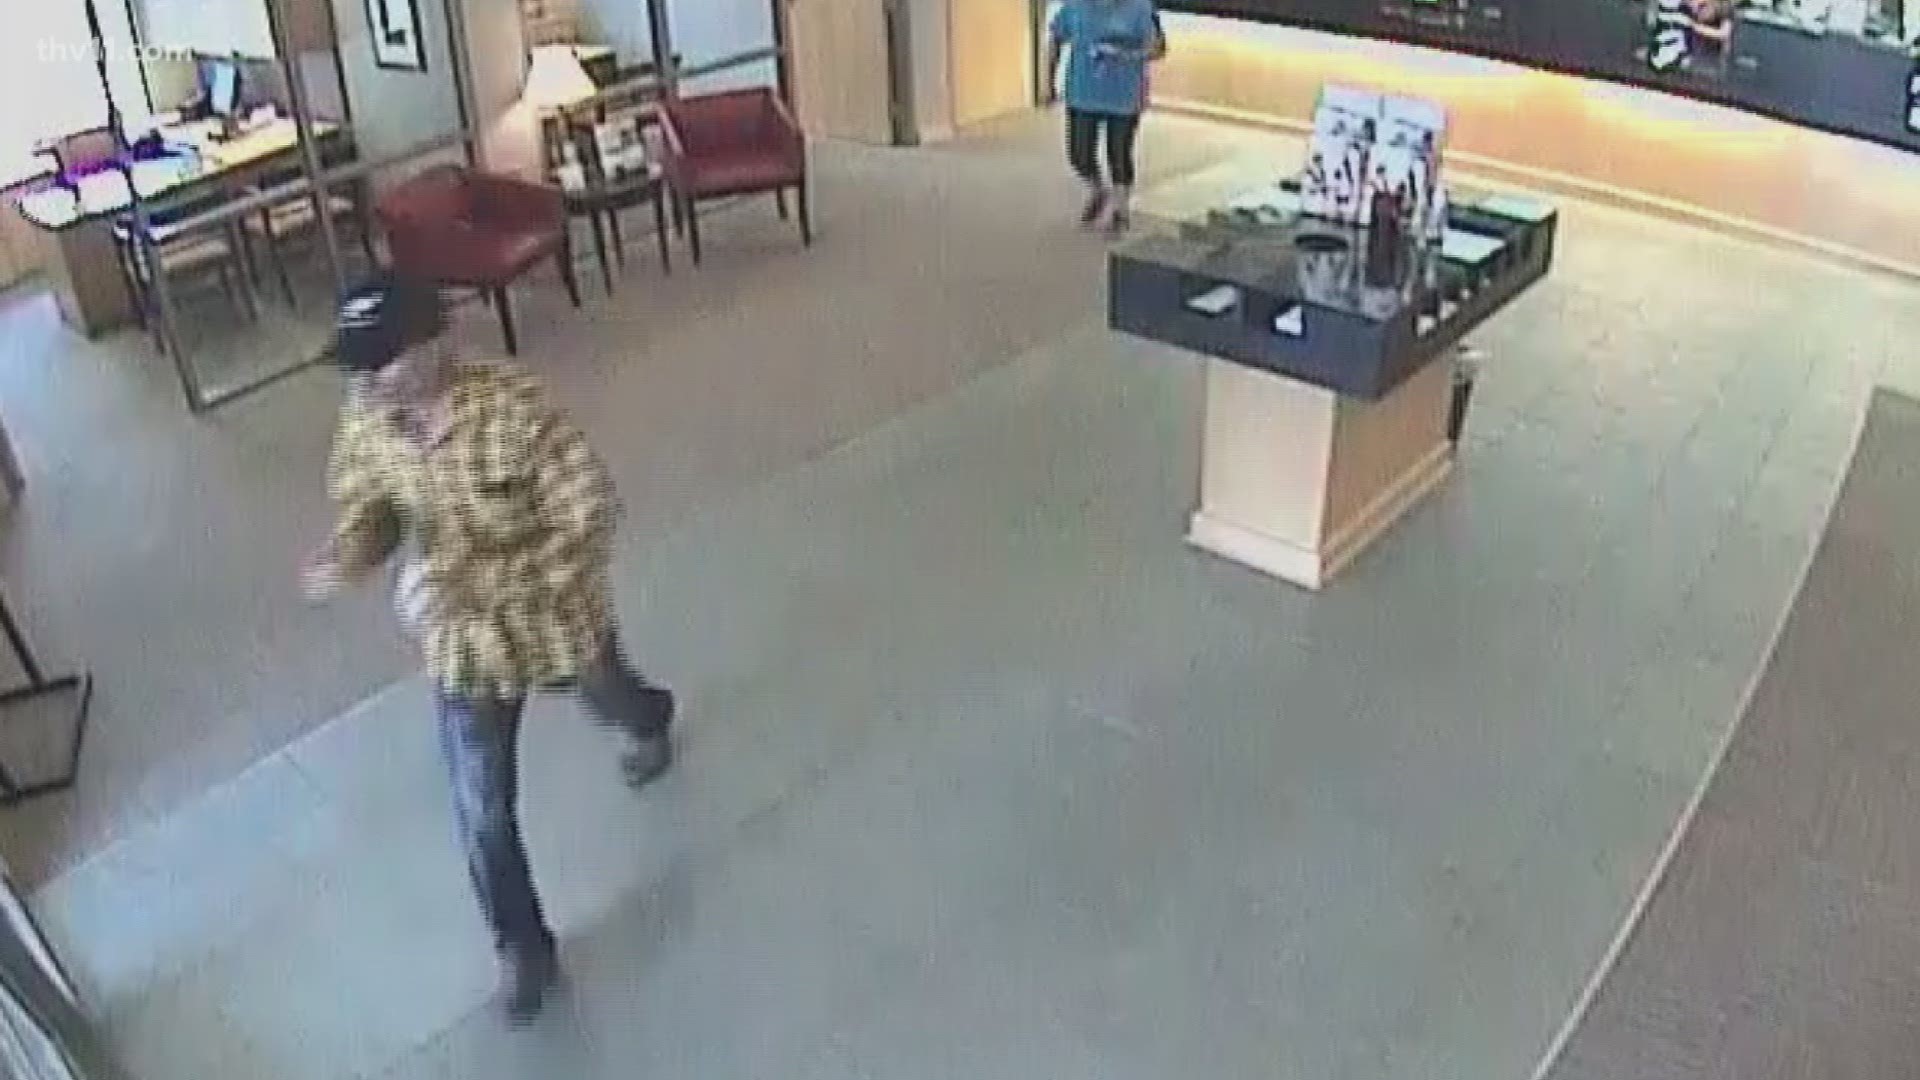 Police said Shawn Sarver is the man in surveillance photos who handed the teller a note, demanding money.